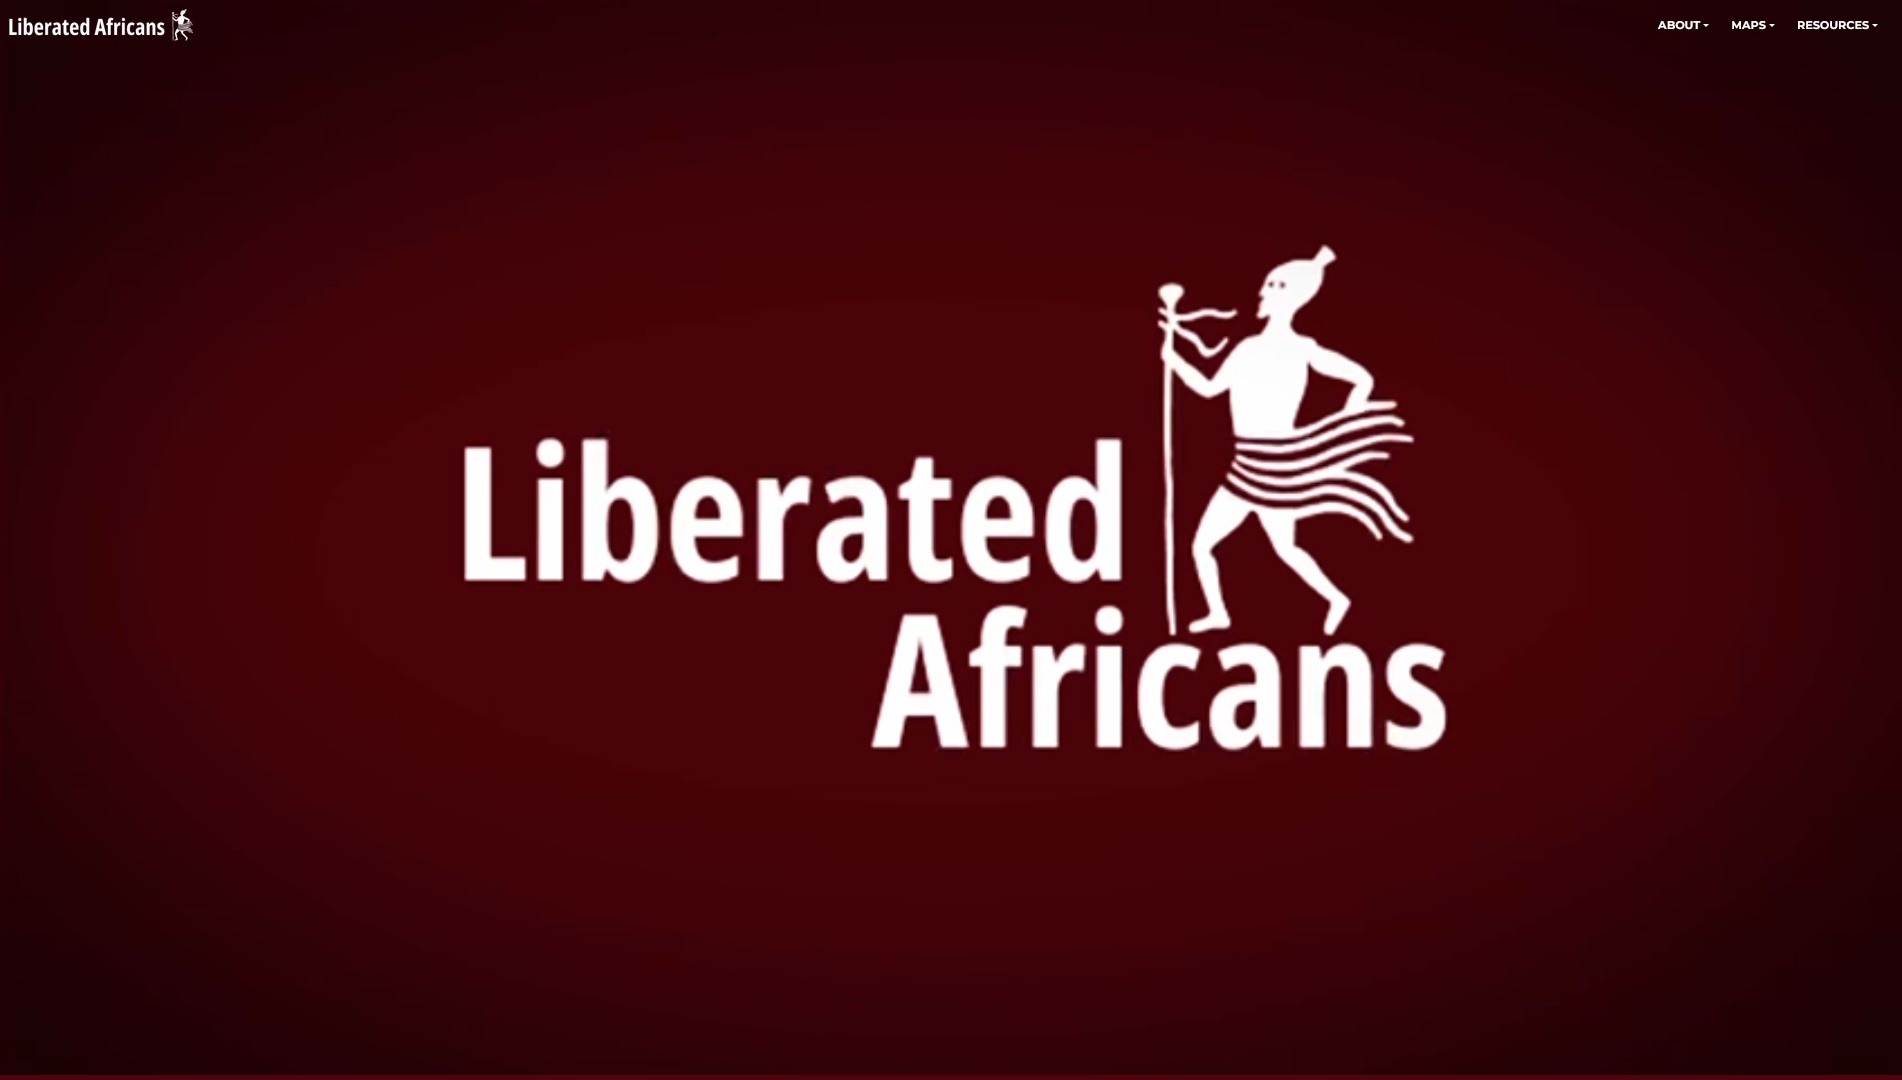 WWW Project - Liberated Africans